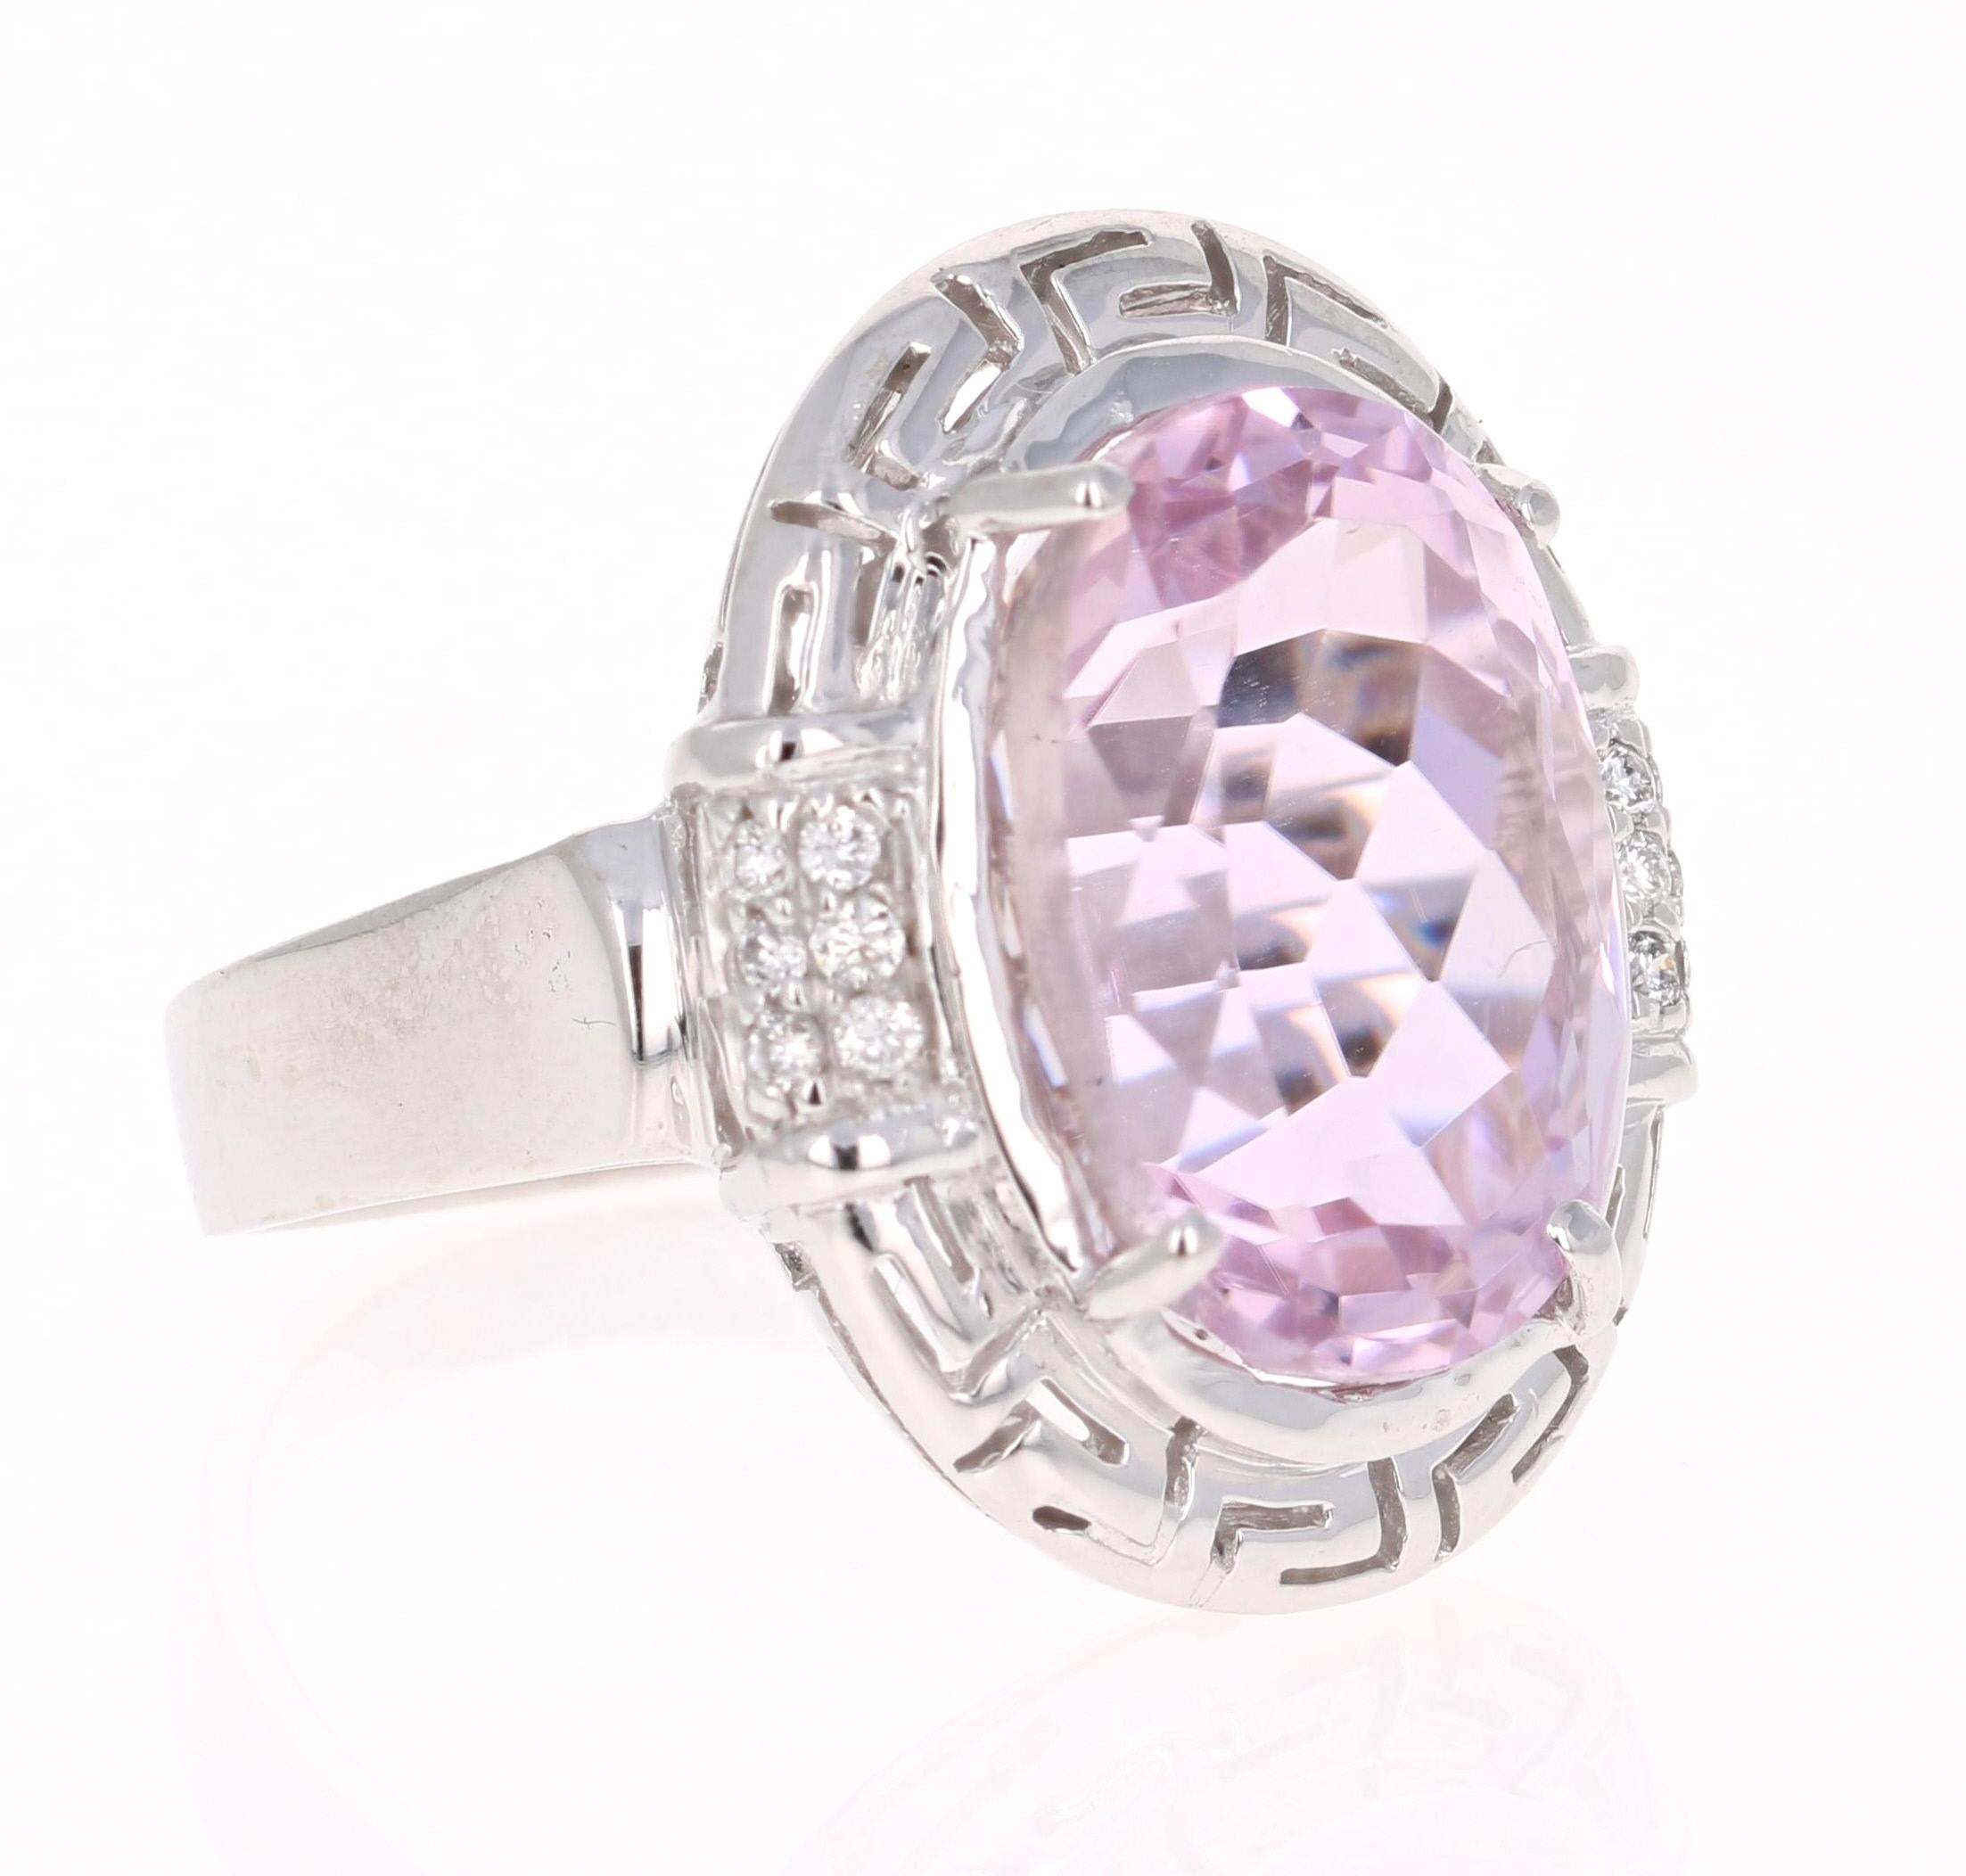 This stunning Art Deco - Inspired ring has a large 12.09 Carat Kunzite and is surrounded by 14 Round Cut Diamonds that weigh 0.14 carats.  The total carat weight of the ring is 12.23 carats. The design of this ring is so unique and totally art-deco